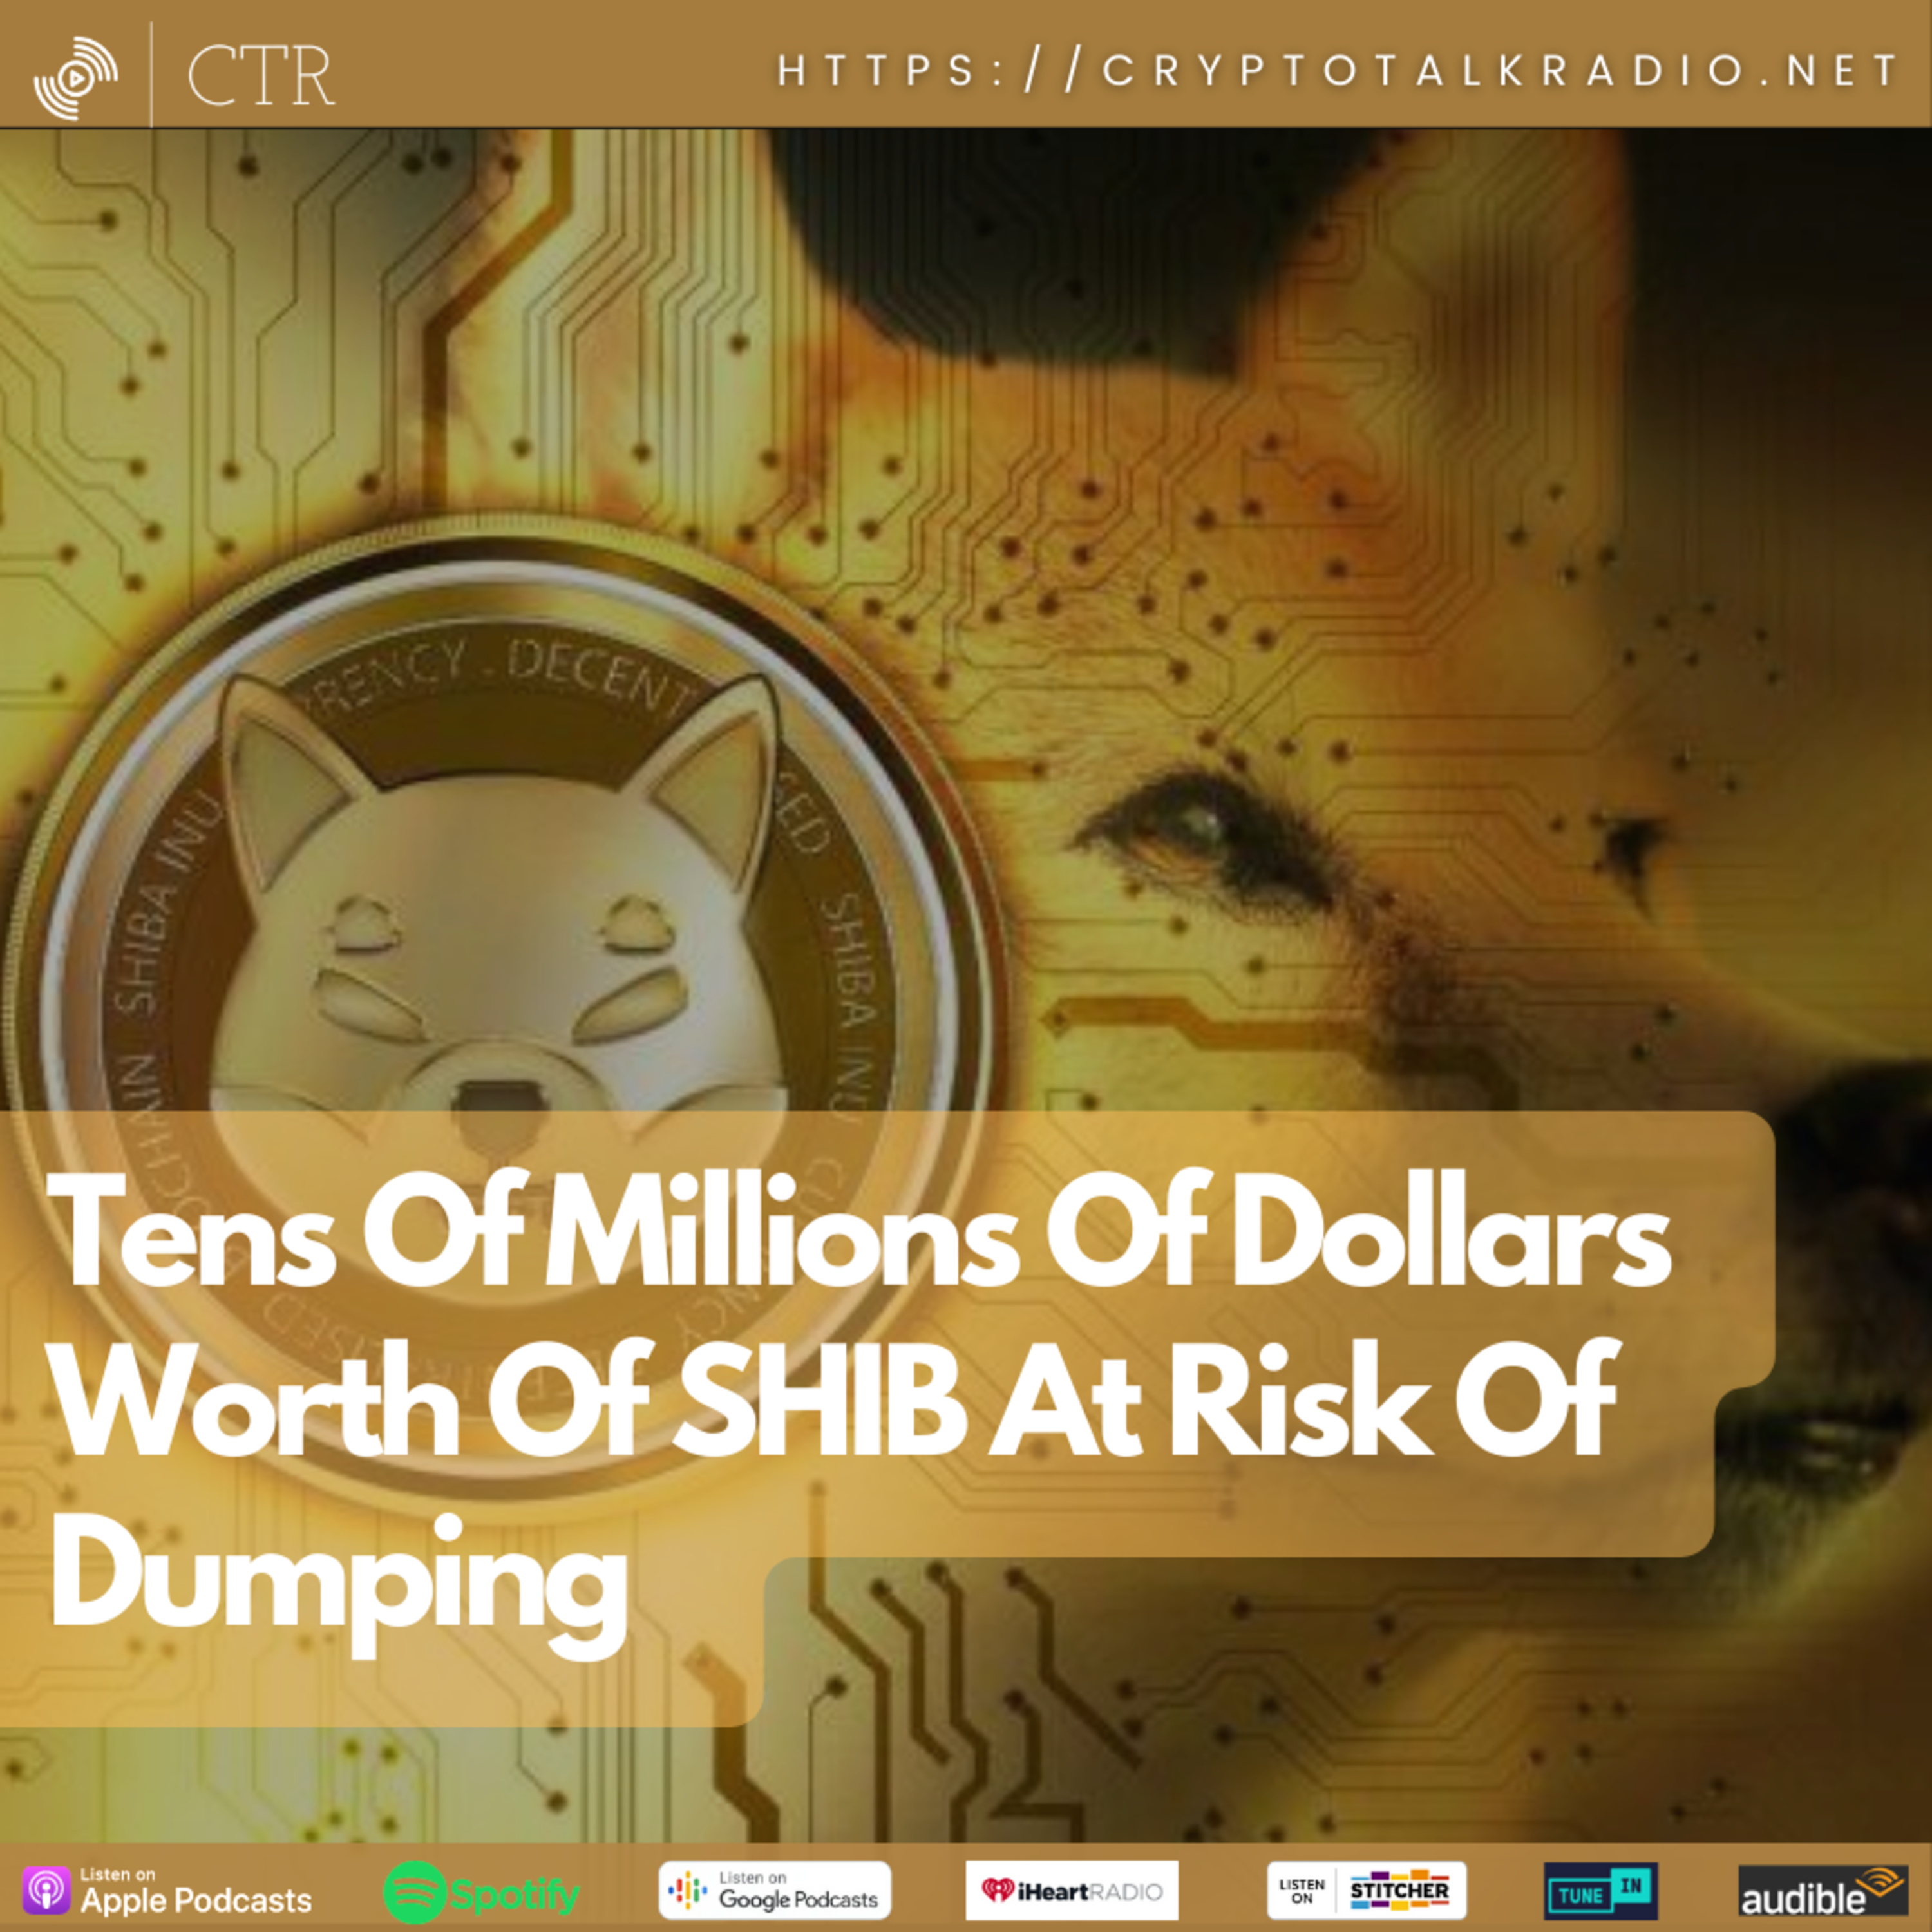 Tens Of Millions Of Dollars Worth Of #SHIB At Risk Of Dumping